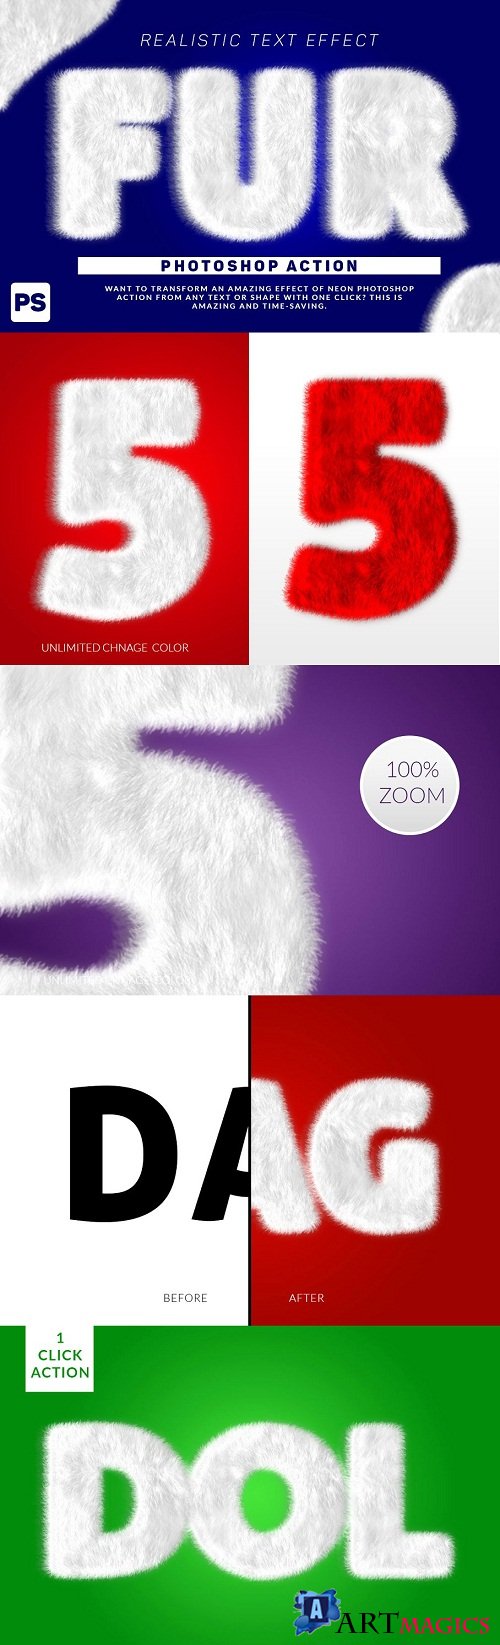 Wool Text Effect Photoshop Action 3165755